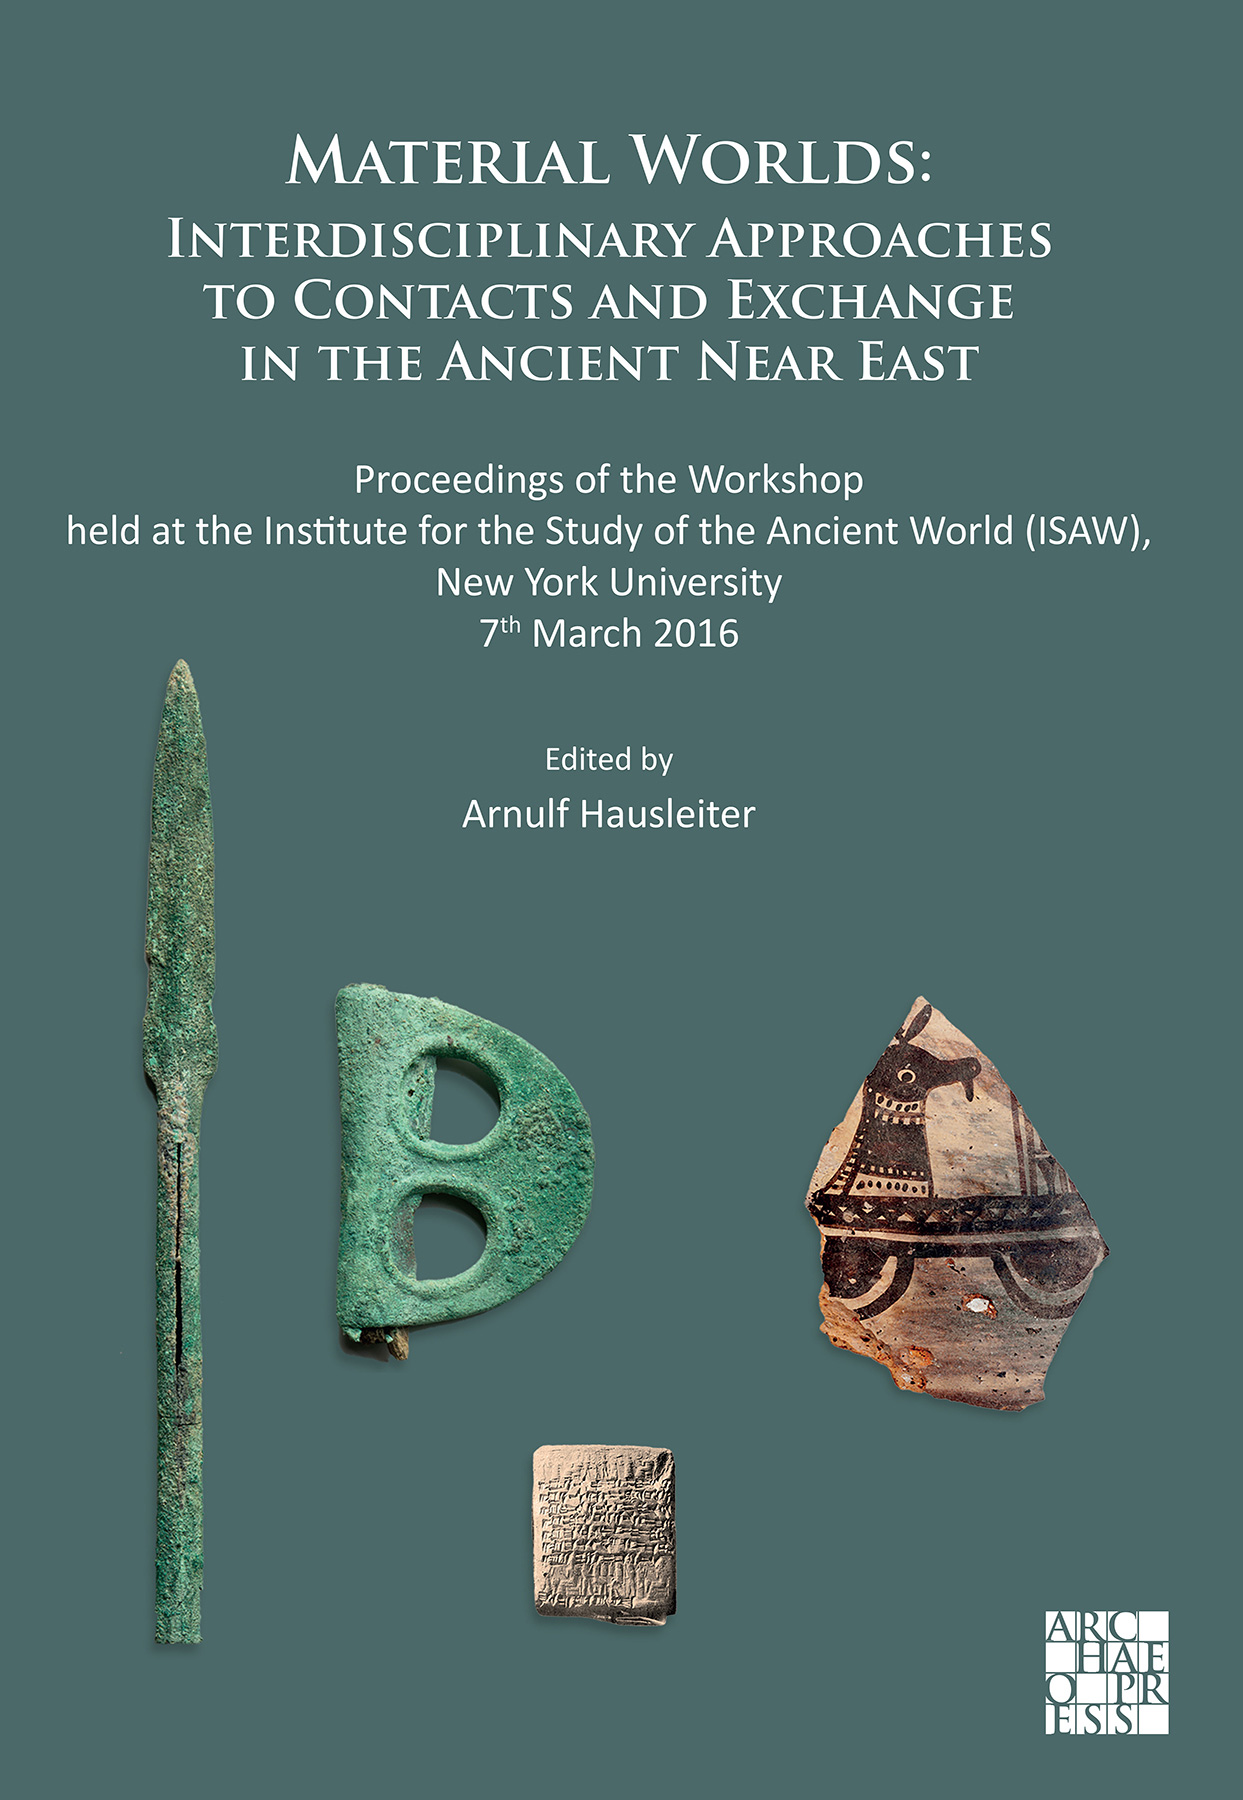 Publication of proceedings of 'Material Worlds' workshop held at ISAW in 2016